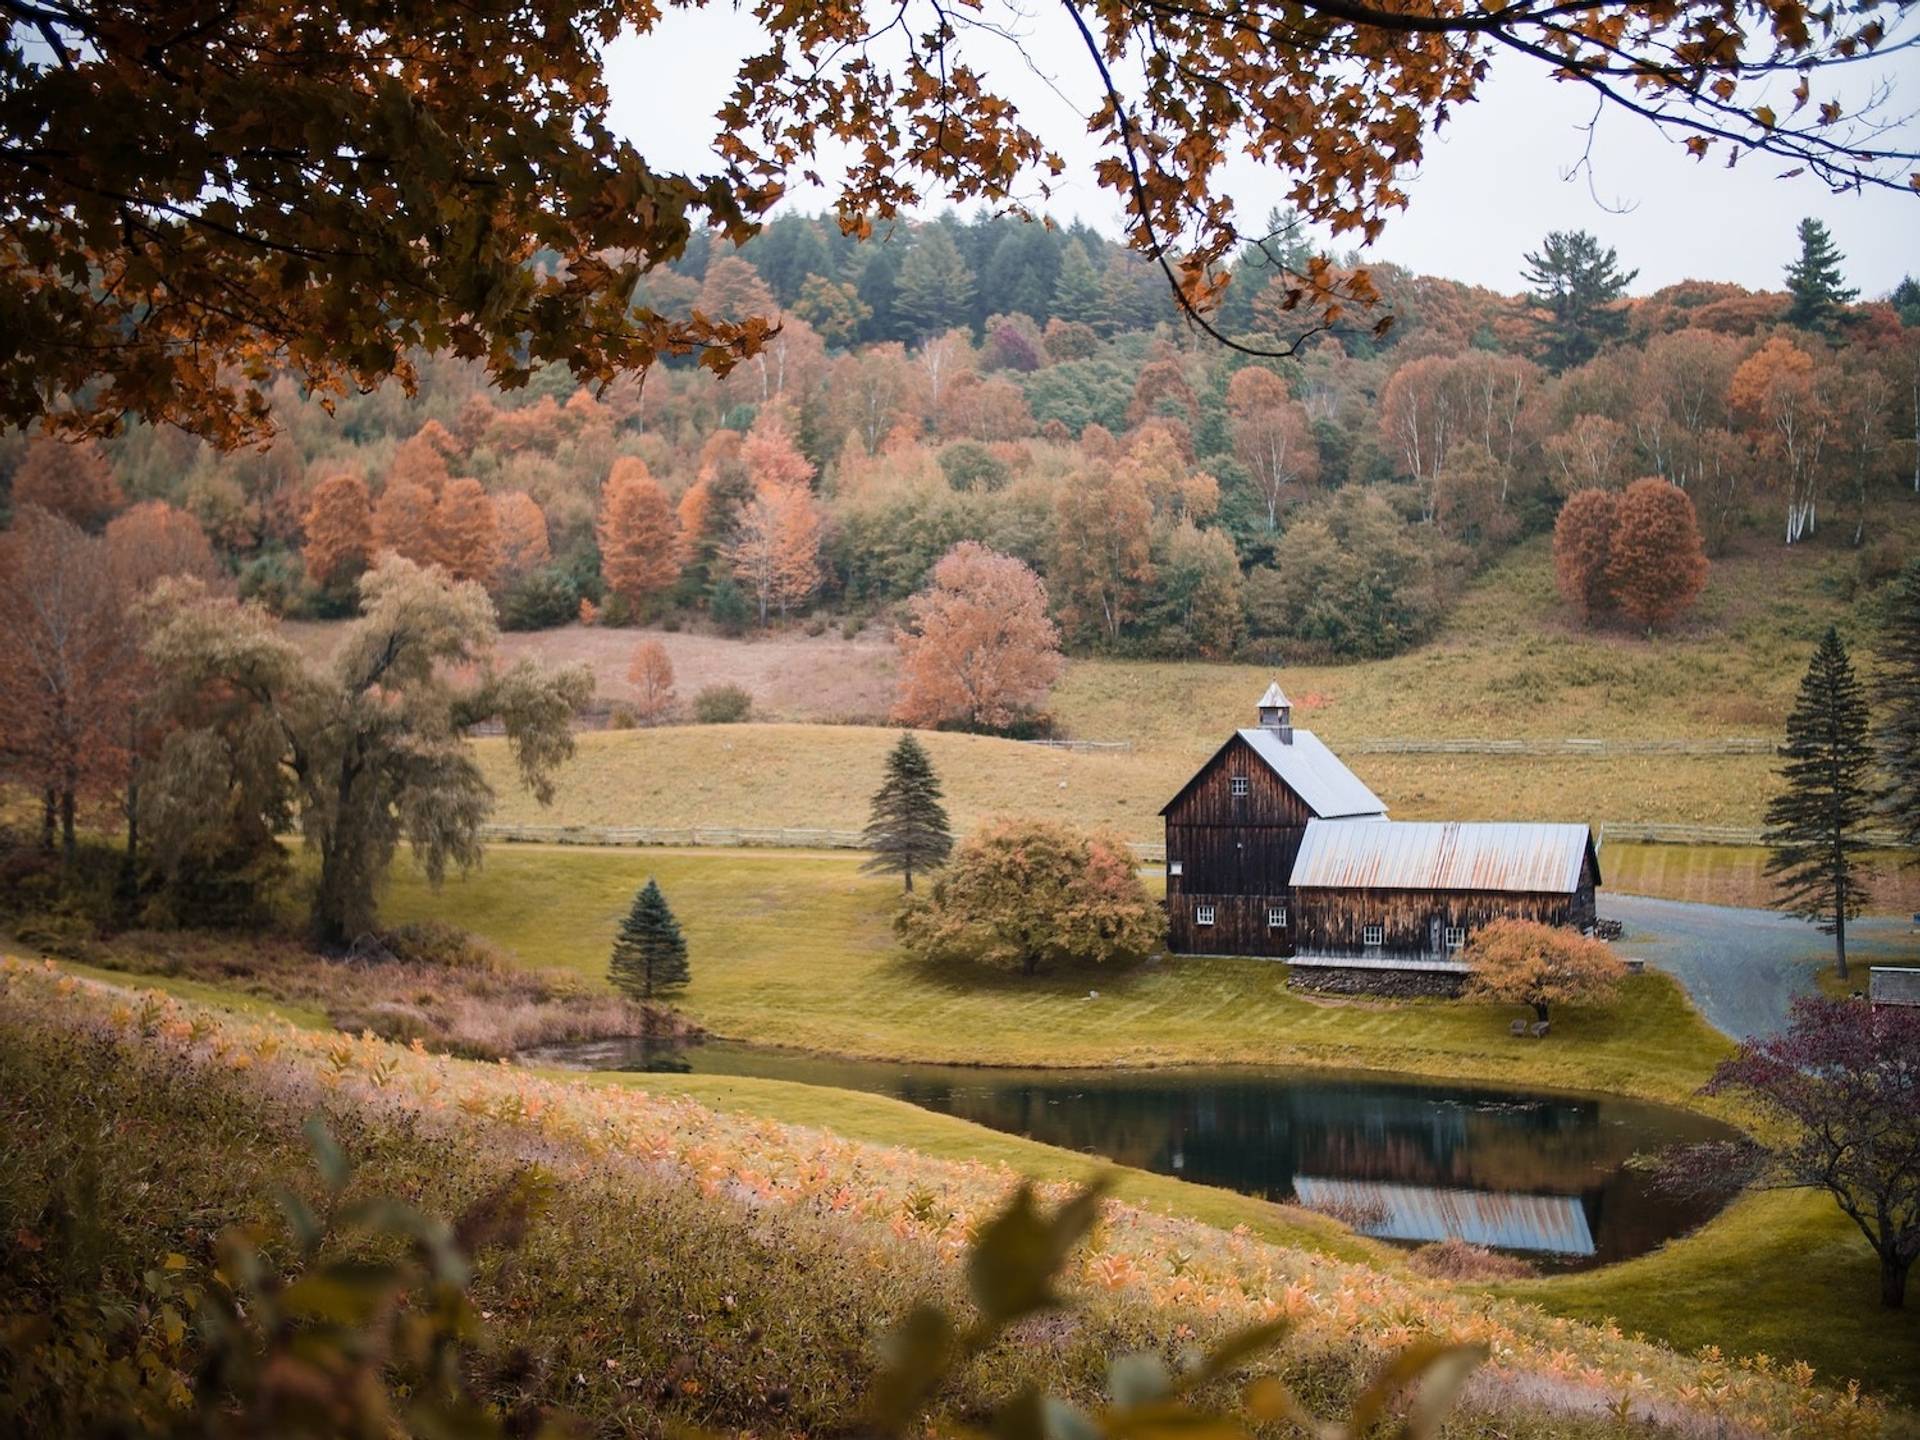 An old farmhouse with a pond surrounded by hills with fall foliage to represent where to buy e-bikes in Vermont